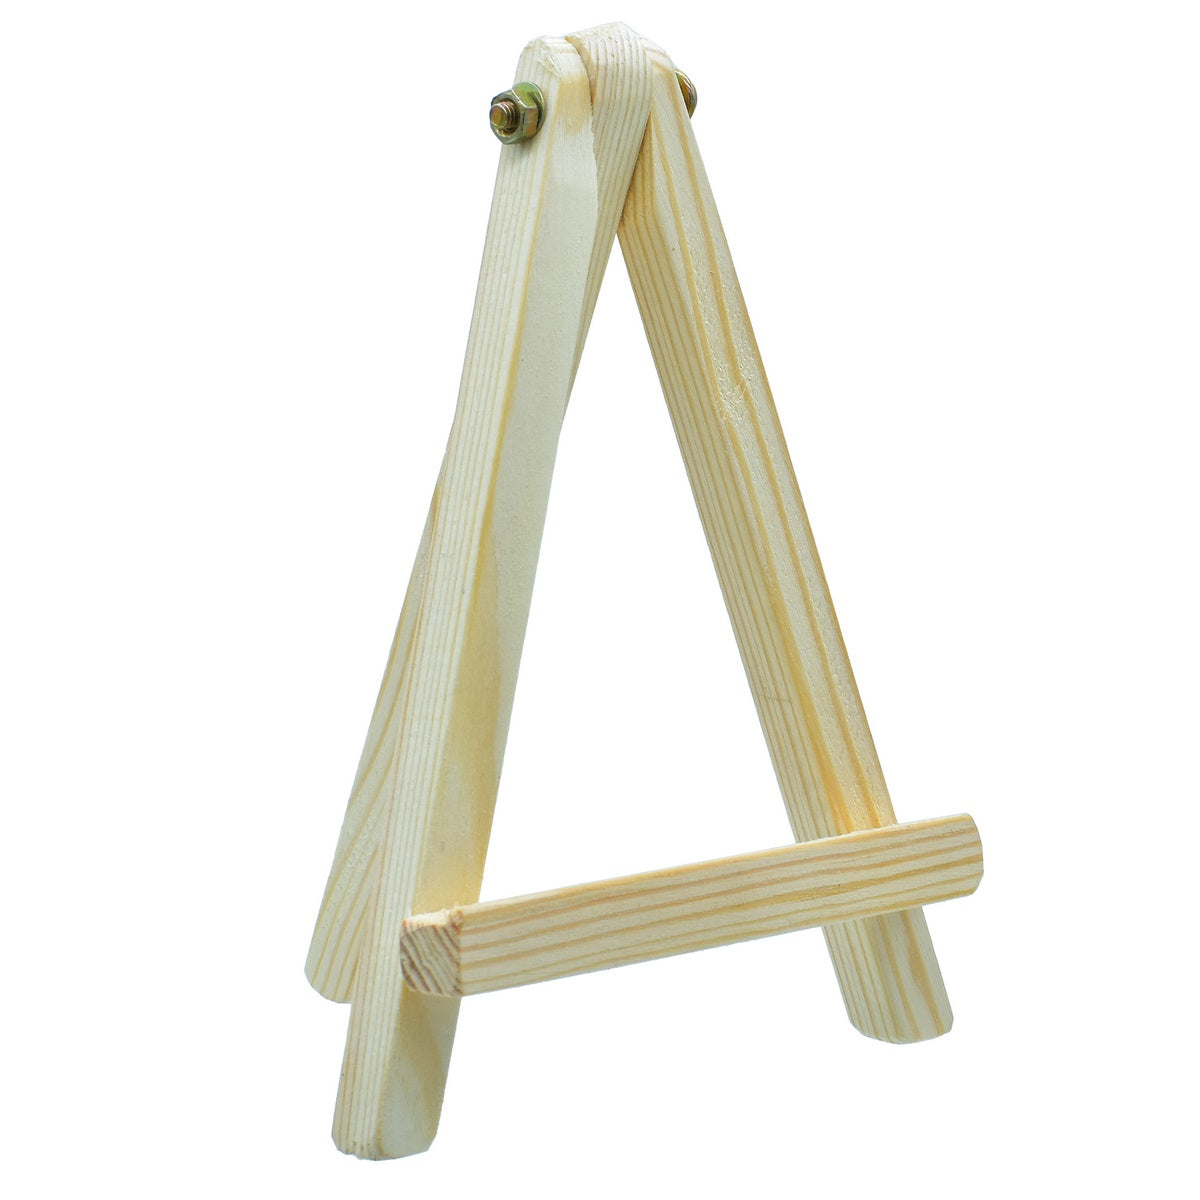 jags-mumbai Easel Wooden Easel Stand Natural 6 Inch